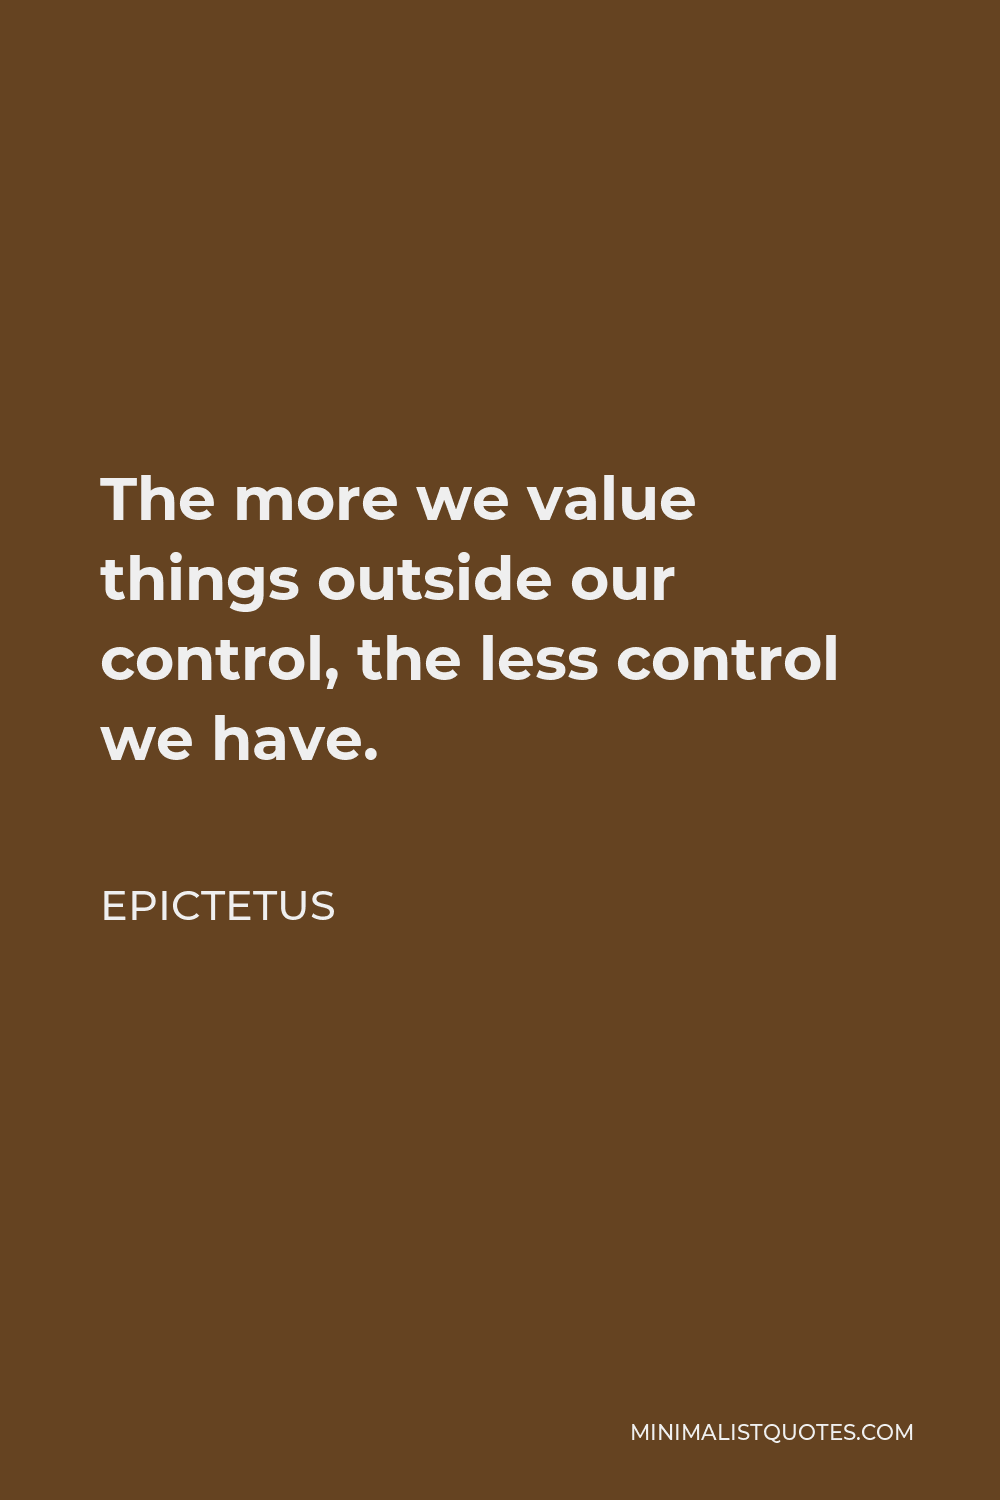 Epictetus Quote - The more we value things outside our control, the less control we have.